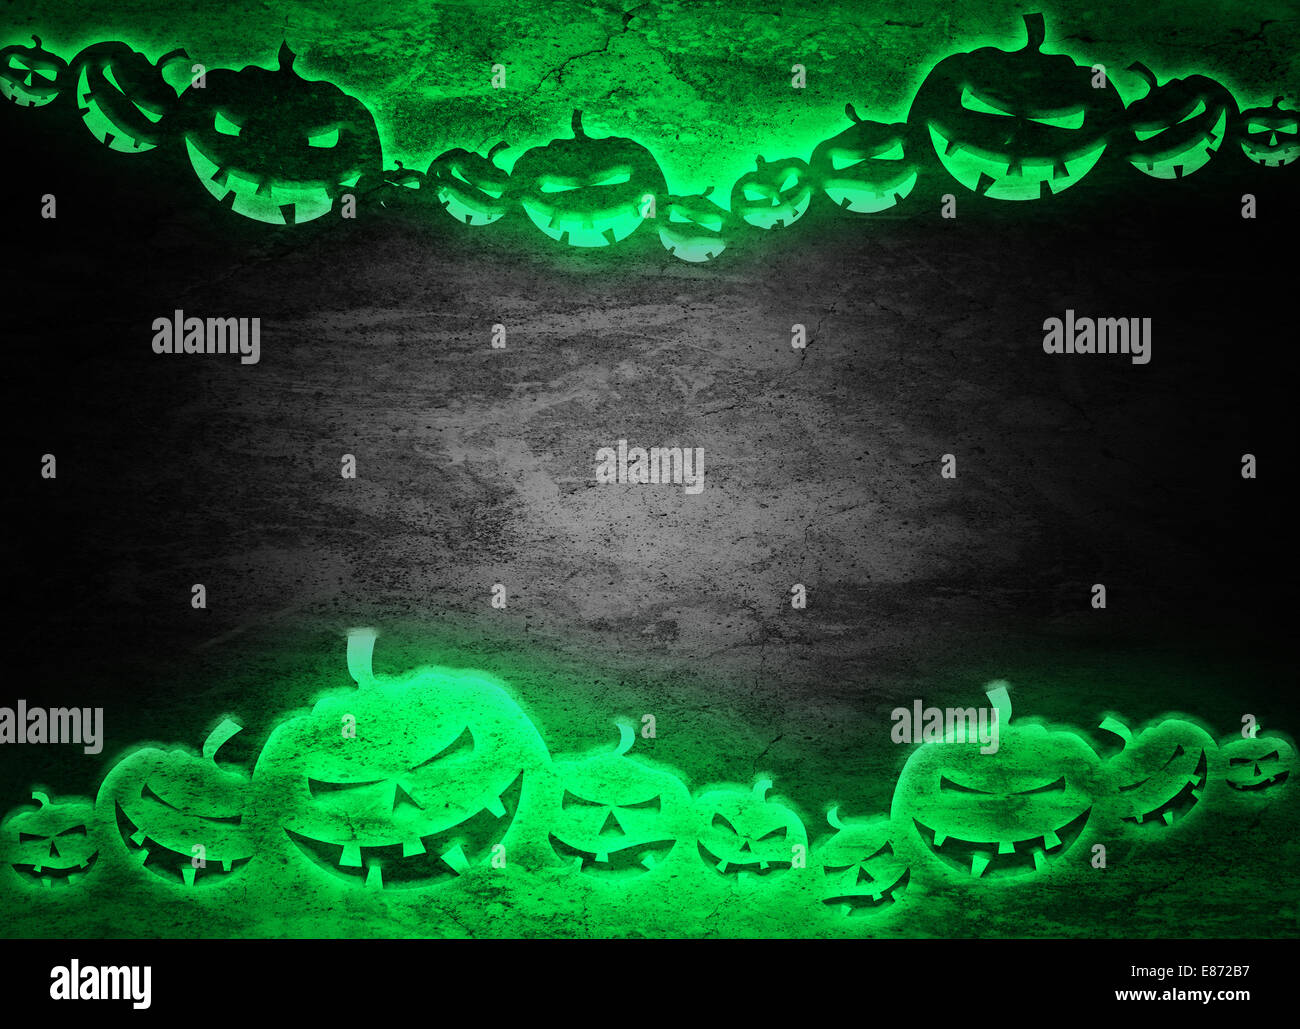 Halloween background for your design. Stock Photo